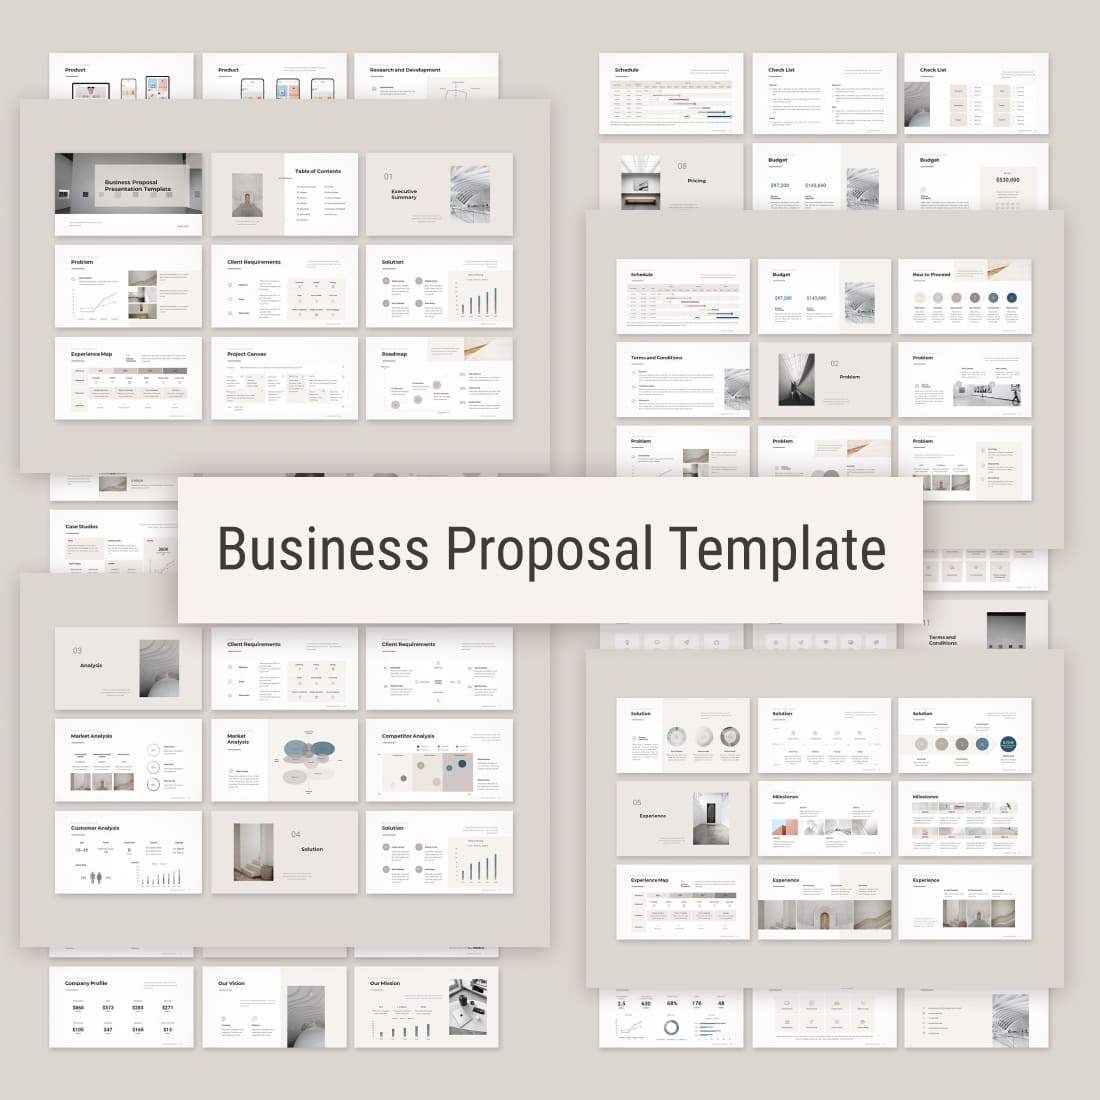 Business Proposal Template 2021.